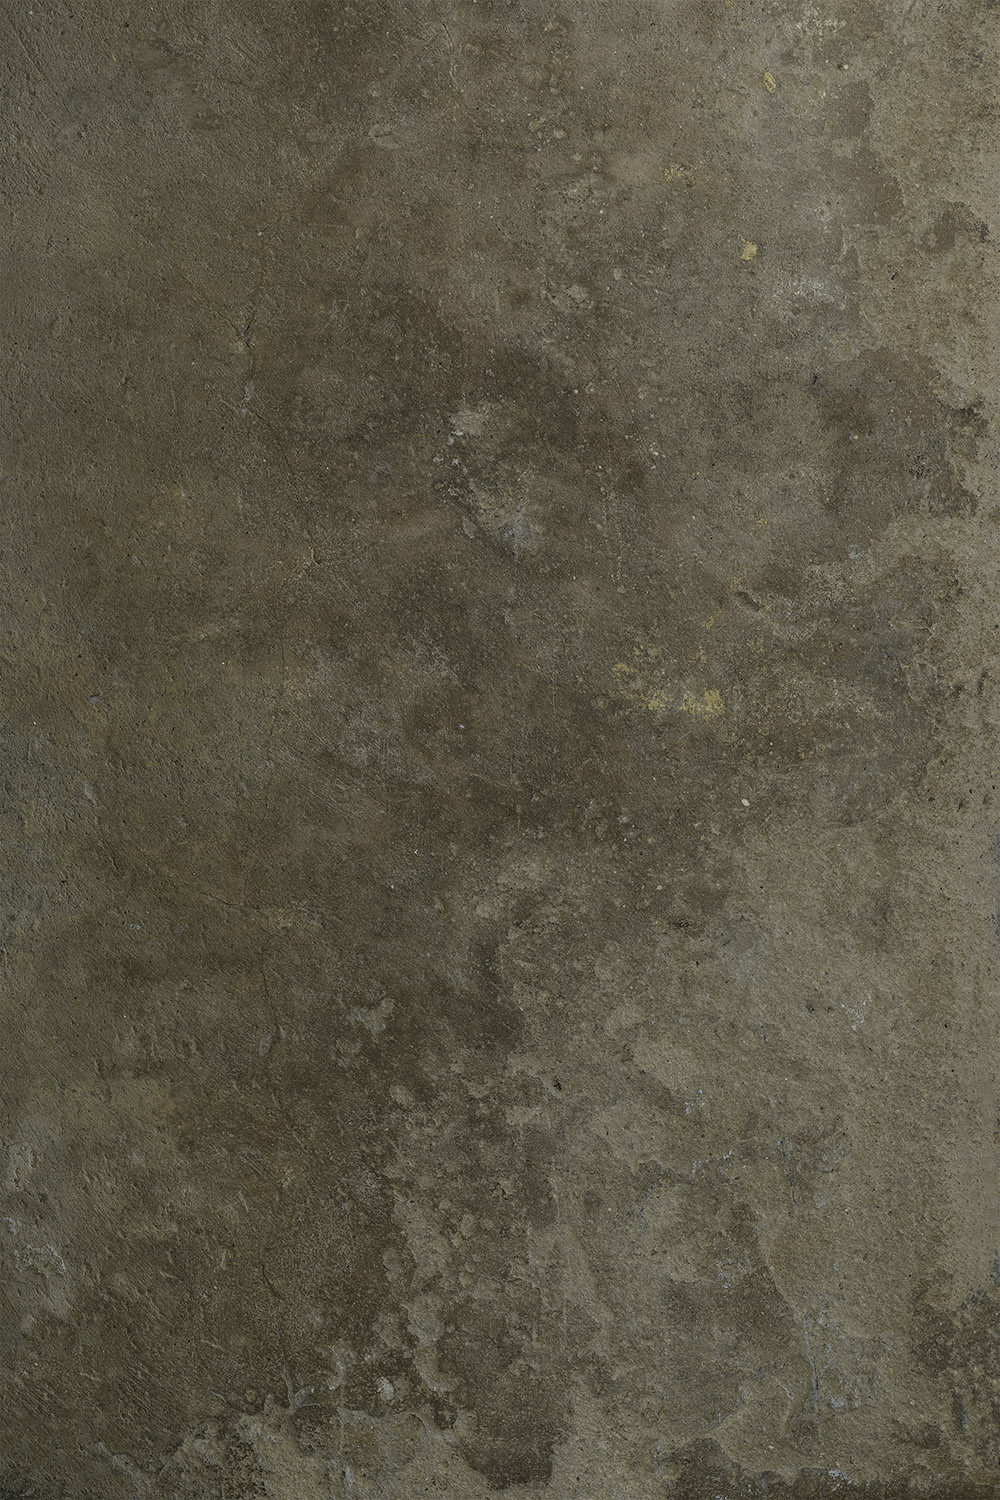 Natural stone vinyl backdrop with stunning textures and color